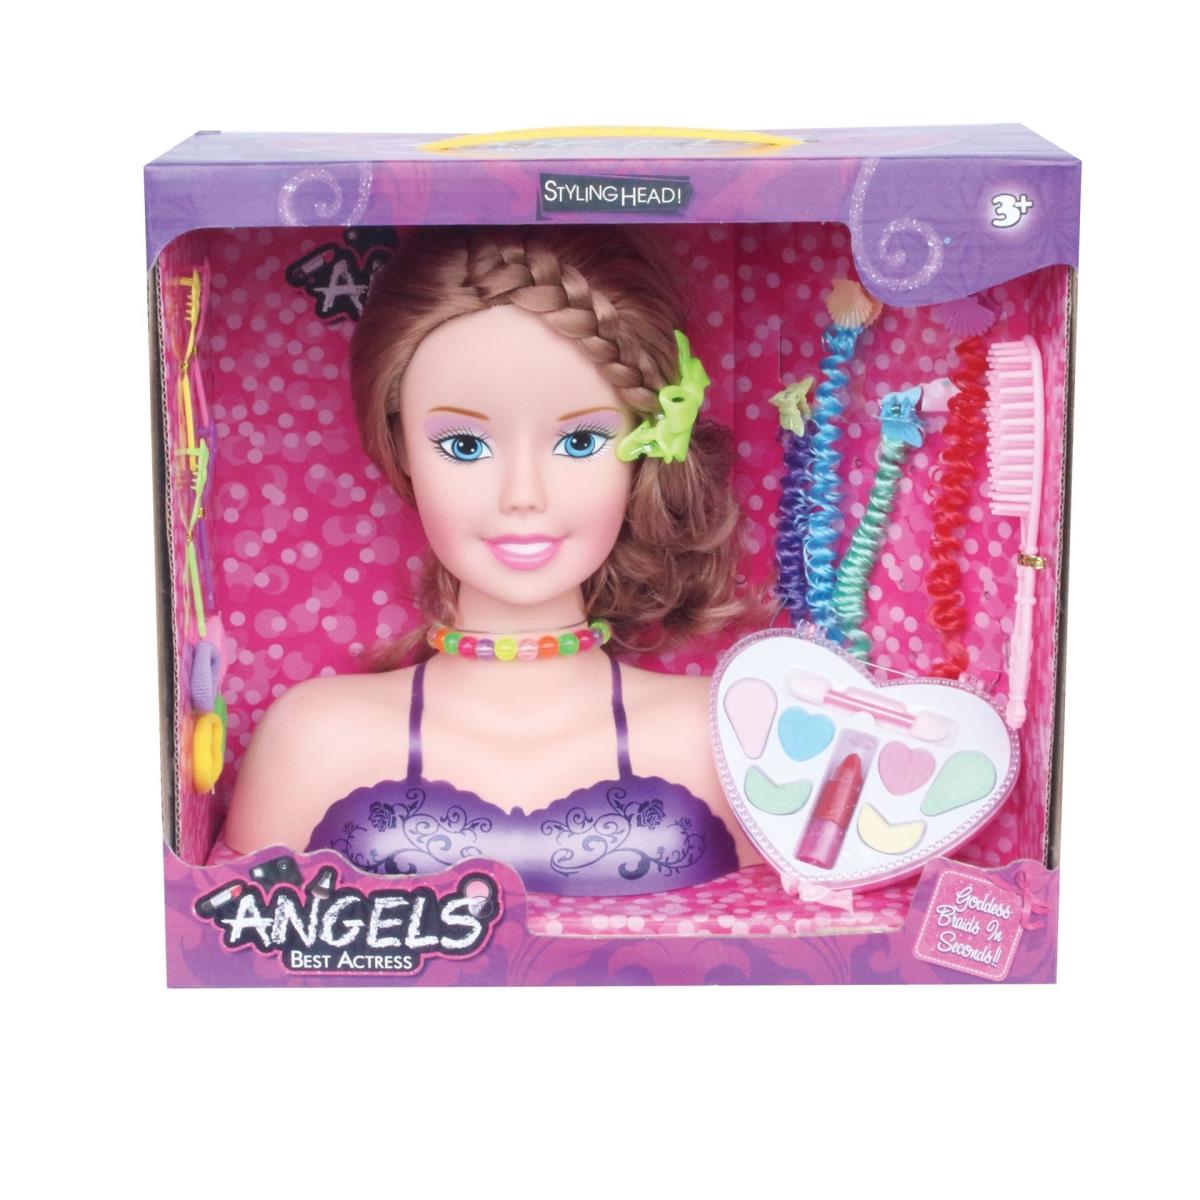 Picture of AZ Trading & Import PSHFM Princess Styling Head Playset with Fashion Accessories